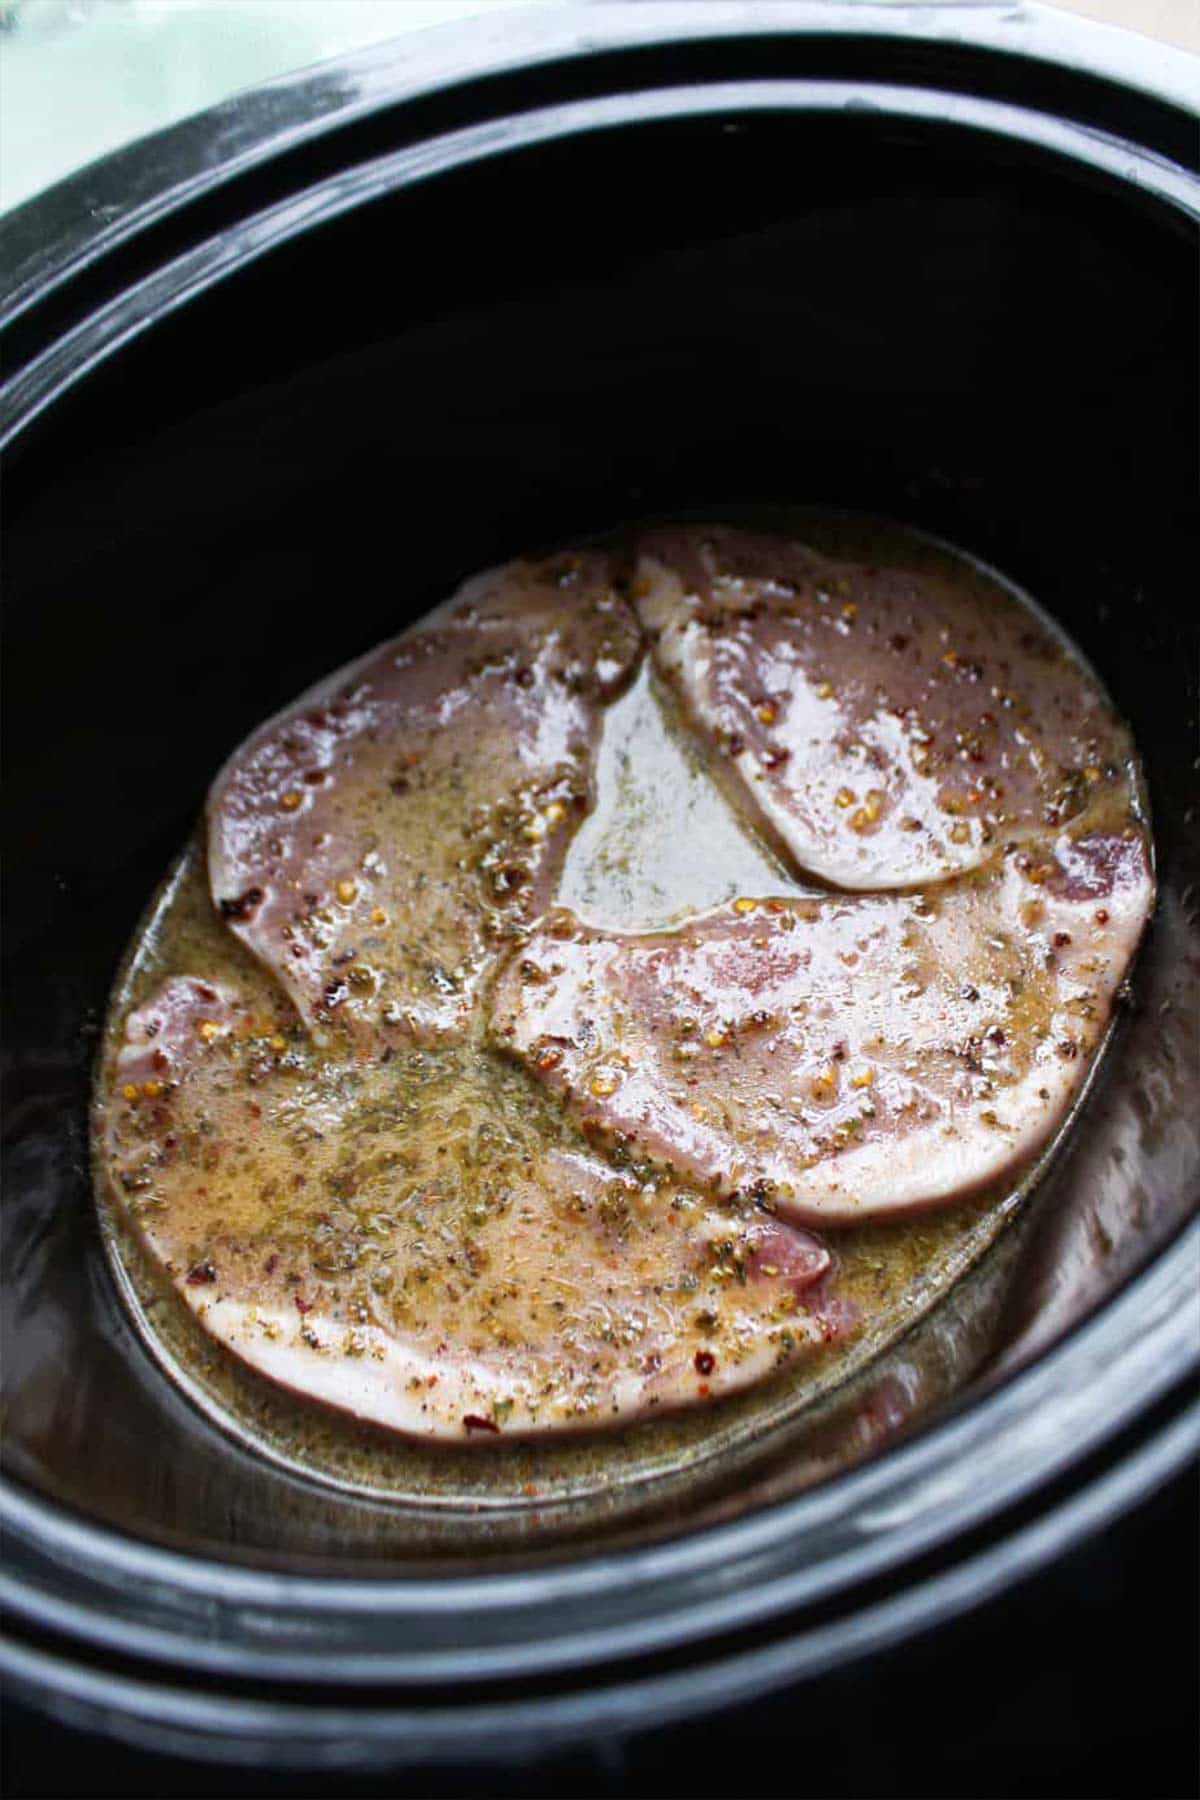 Pork chops and marinade layered on the bottom of the slow cooker.